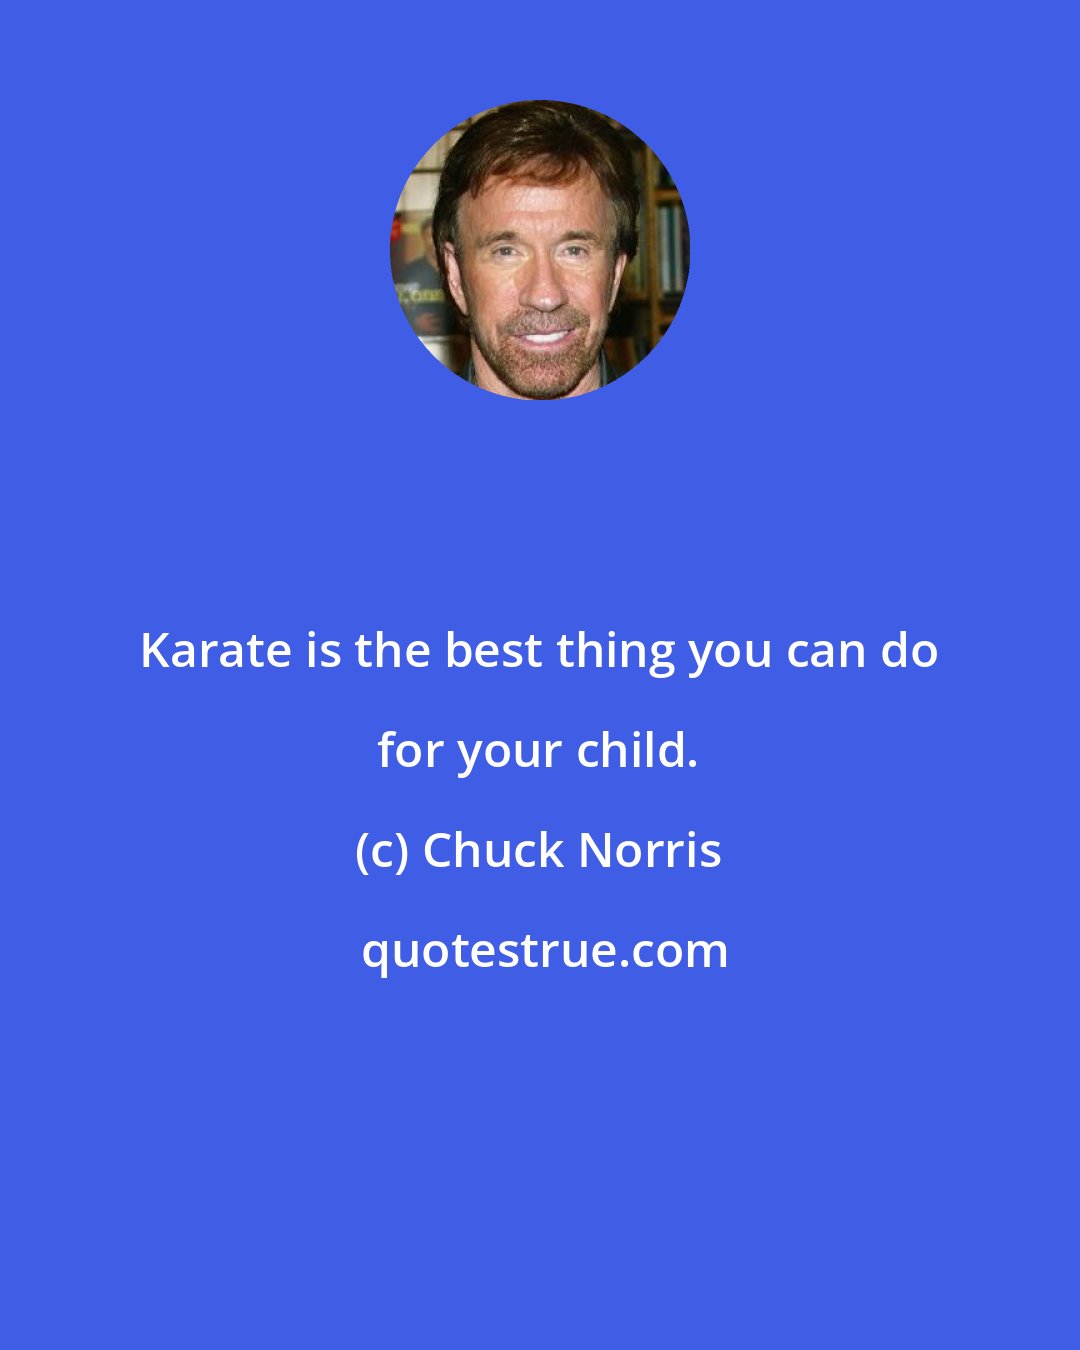 Chuck Norris: Karate is the best thing you can do for your child.